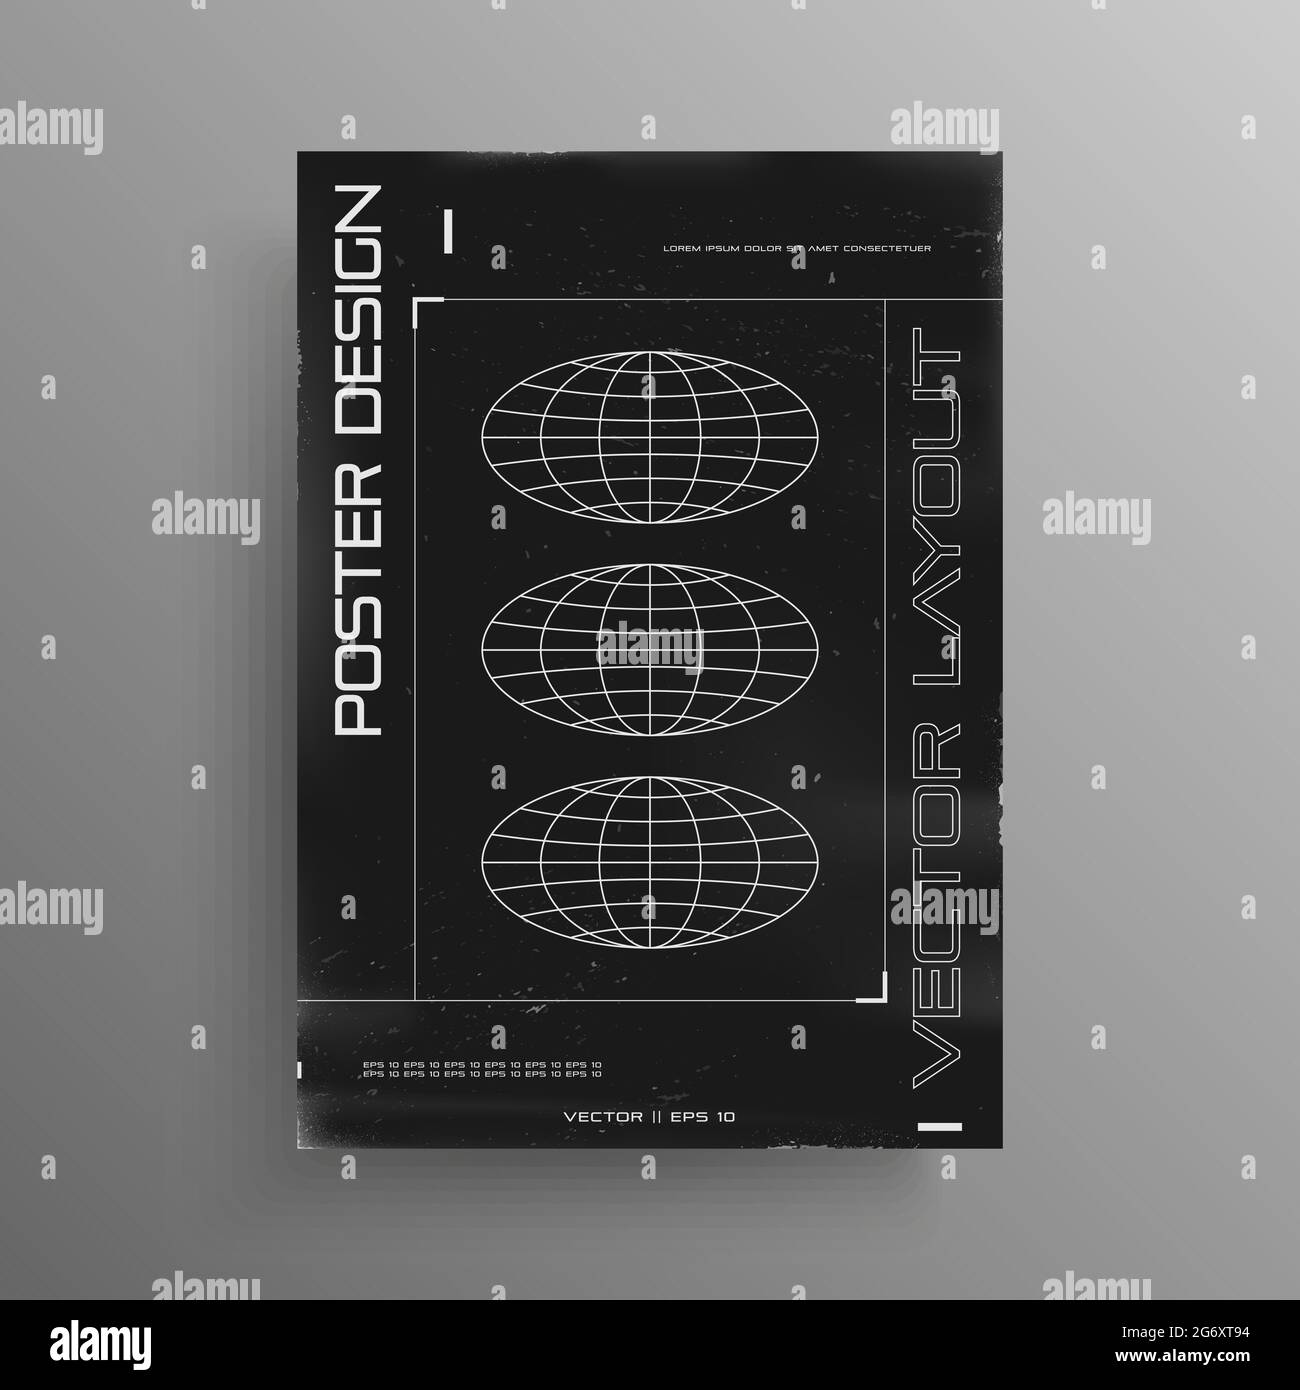 Retrofuturistic black and white poster design with ellipse planets. Retro cyberpunk cover poster with HUD elements. Template for flyer design for Stock Vector